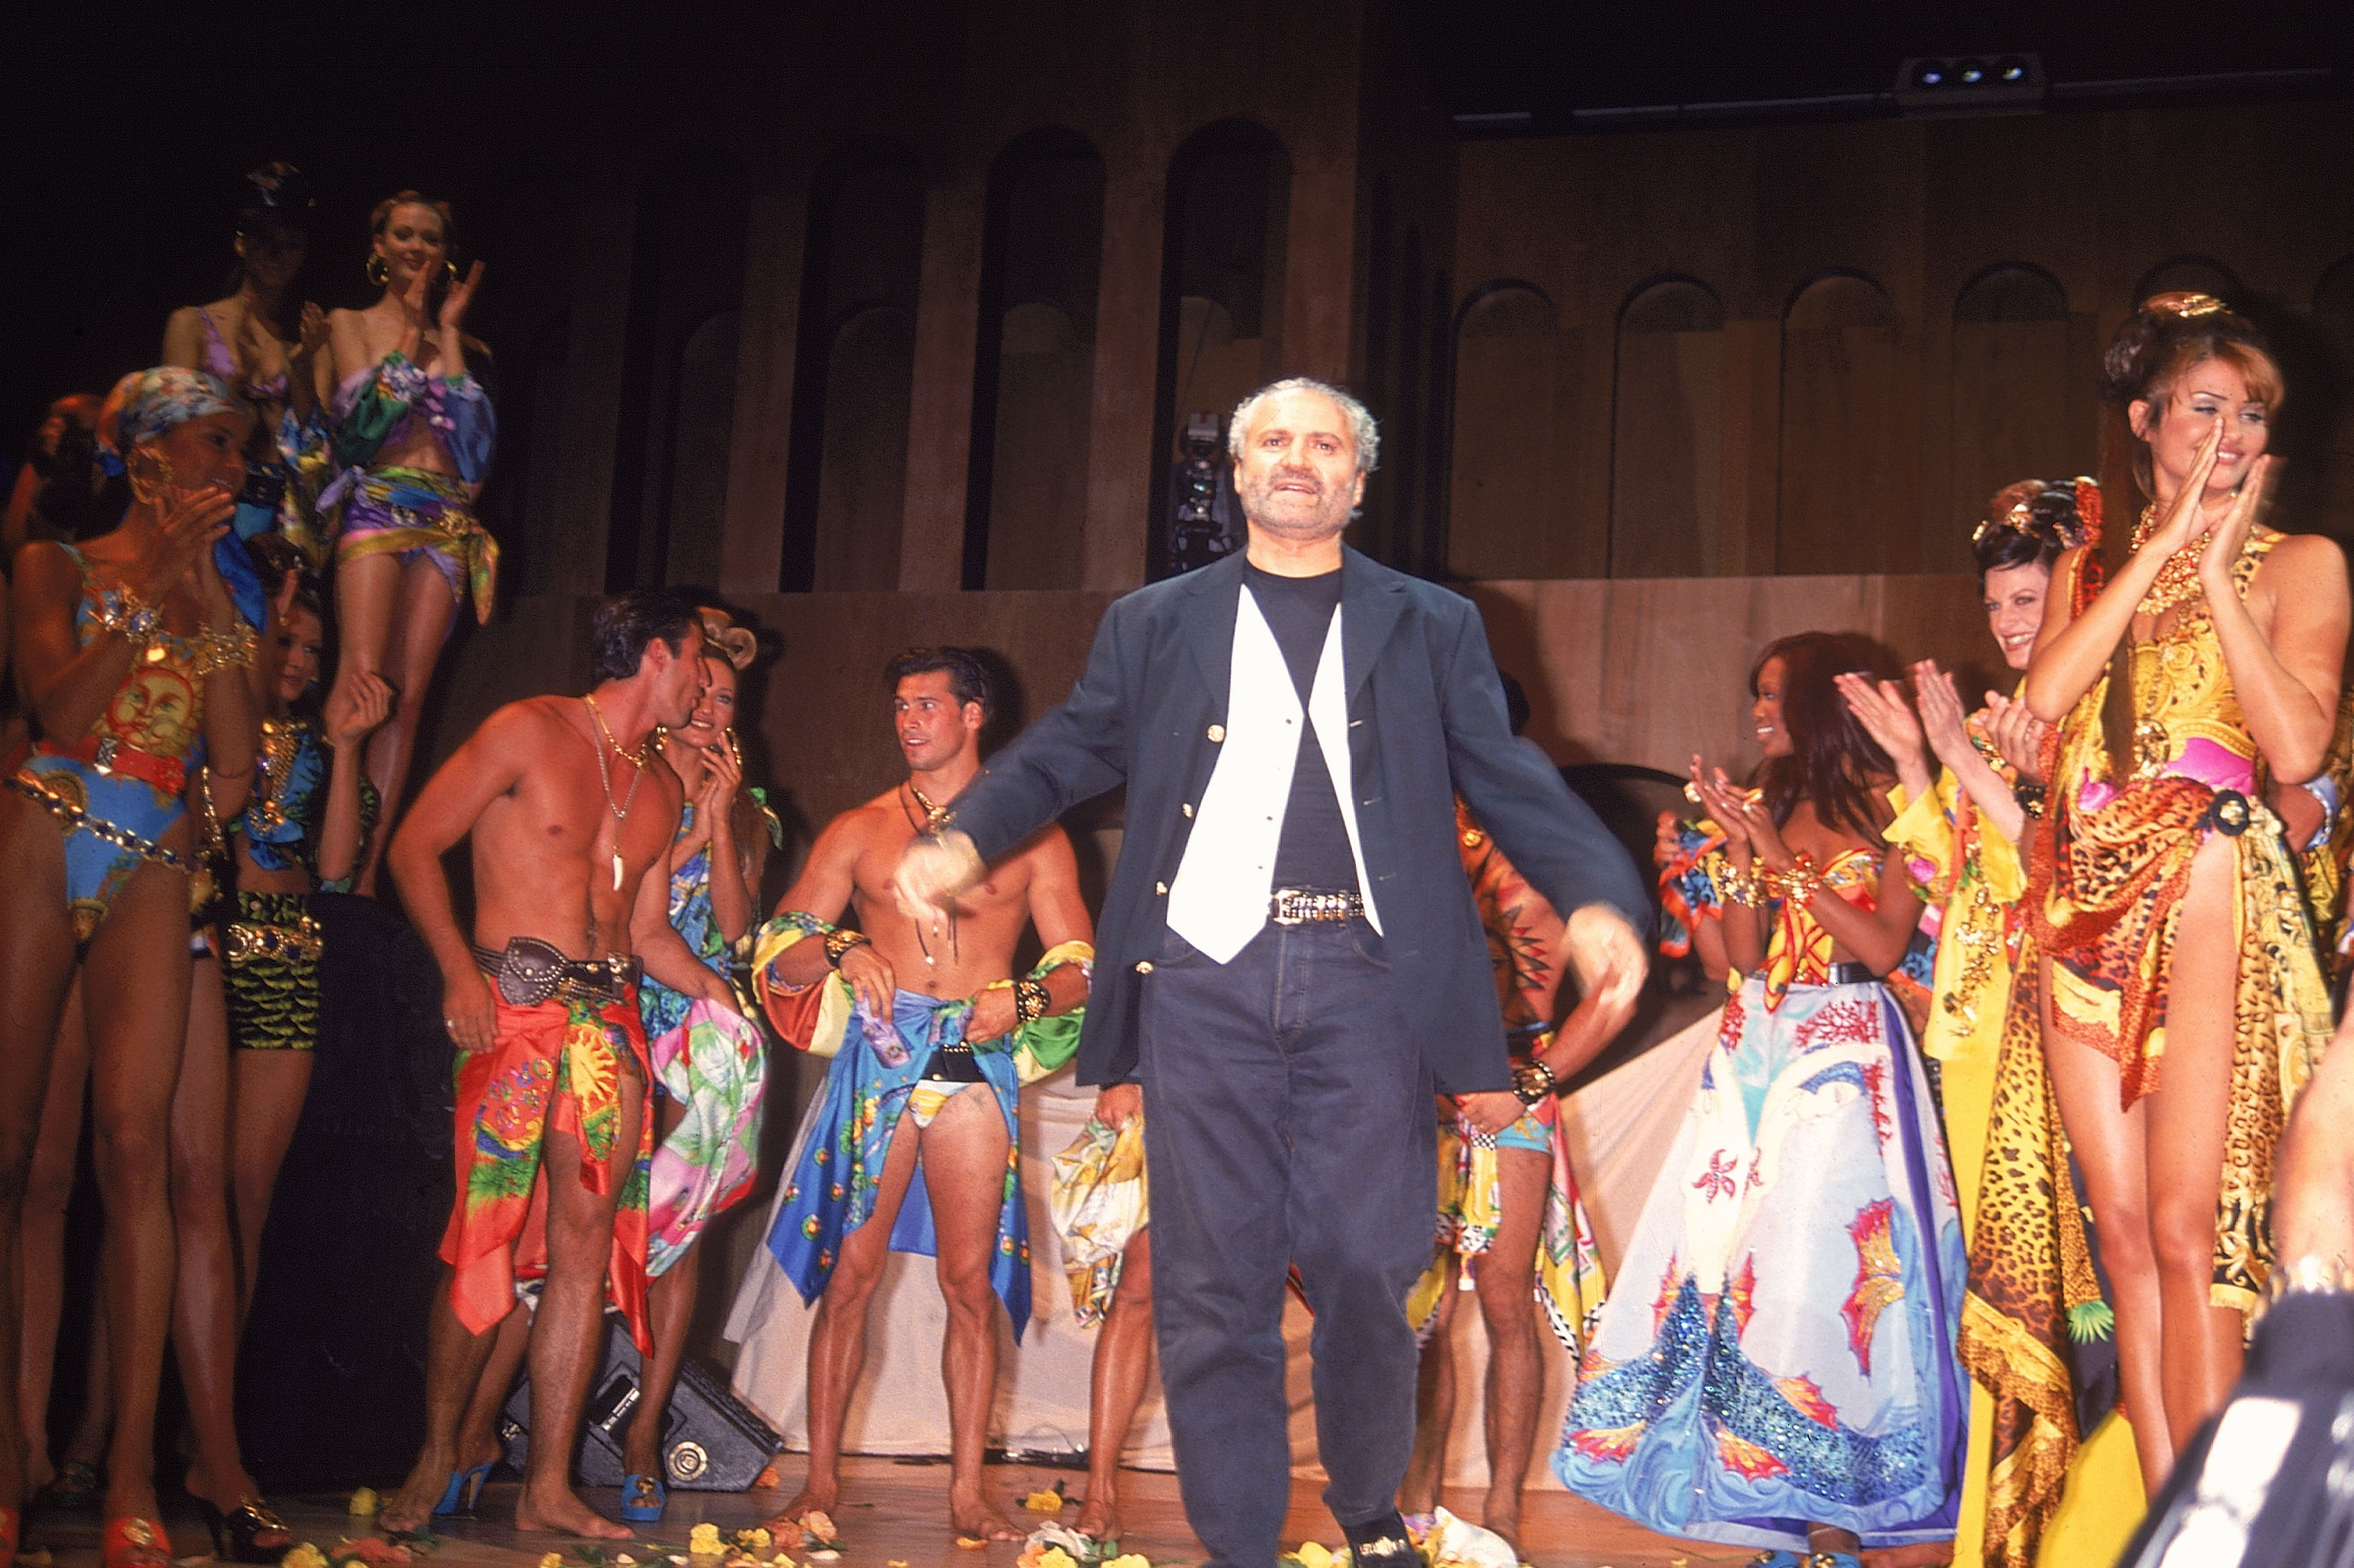 Designer Gianni Versace appearing at a fashion show. (Time Life Pictures—The LIFE Picture Collection/Getty Images)